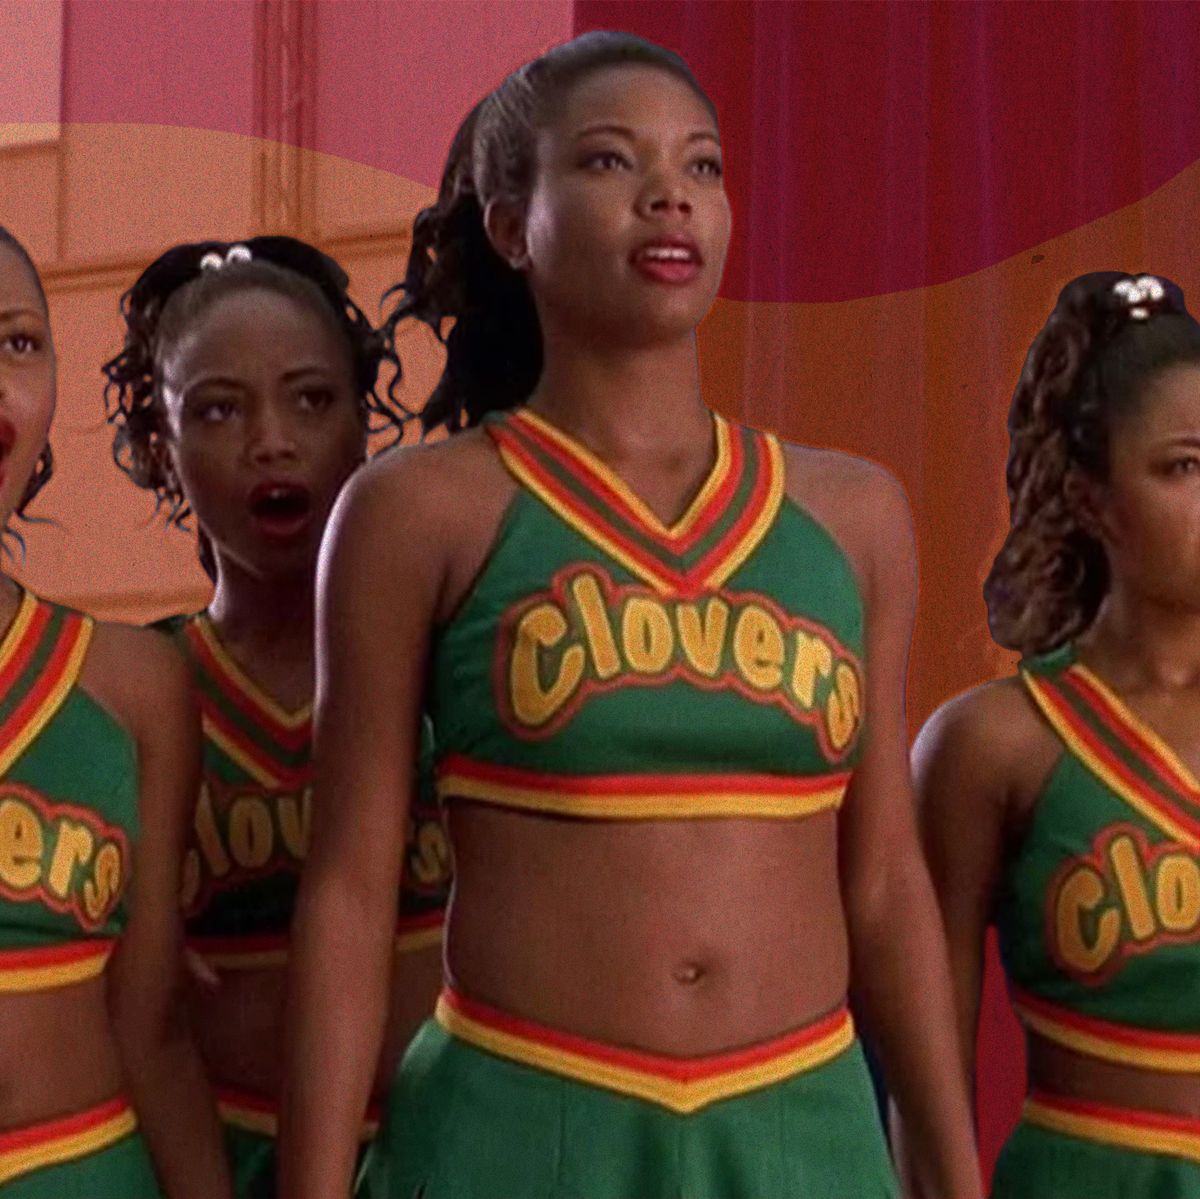 Bring It On Cast: Where Are They Now?